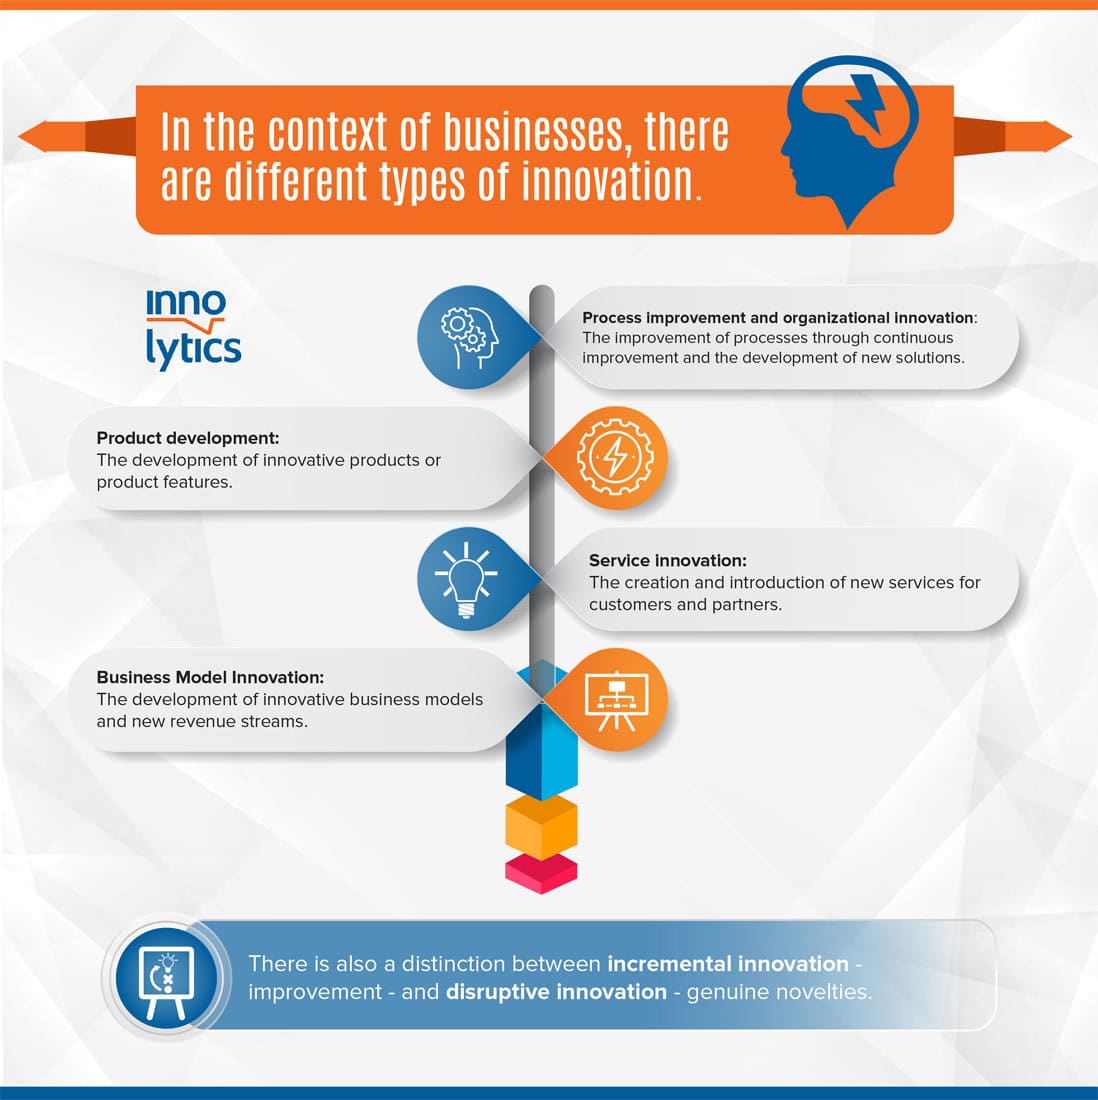 The illustration shows an infographic on four different types of innovation: process improvement / organizational innovation, product development, service innovation, and business model innovation.